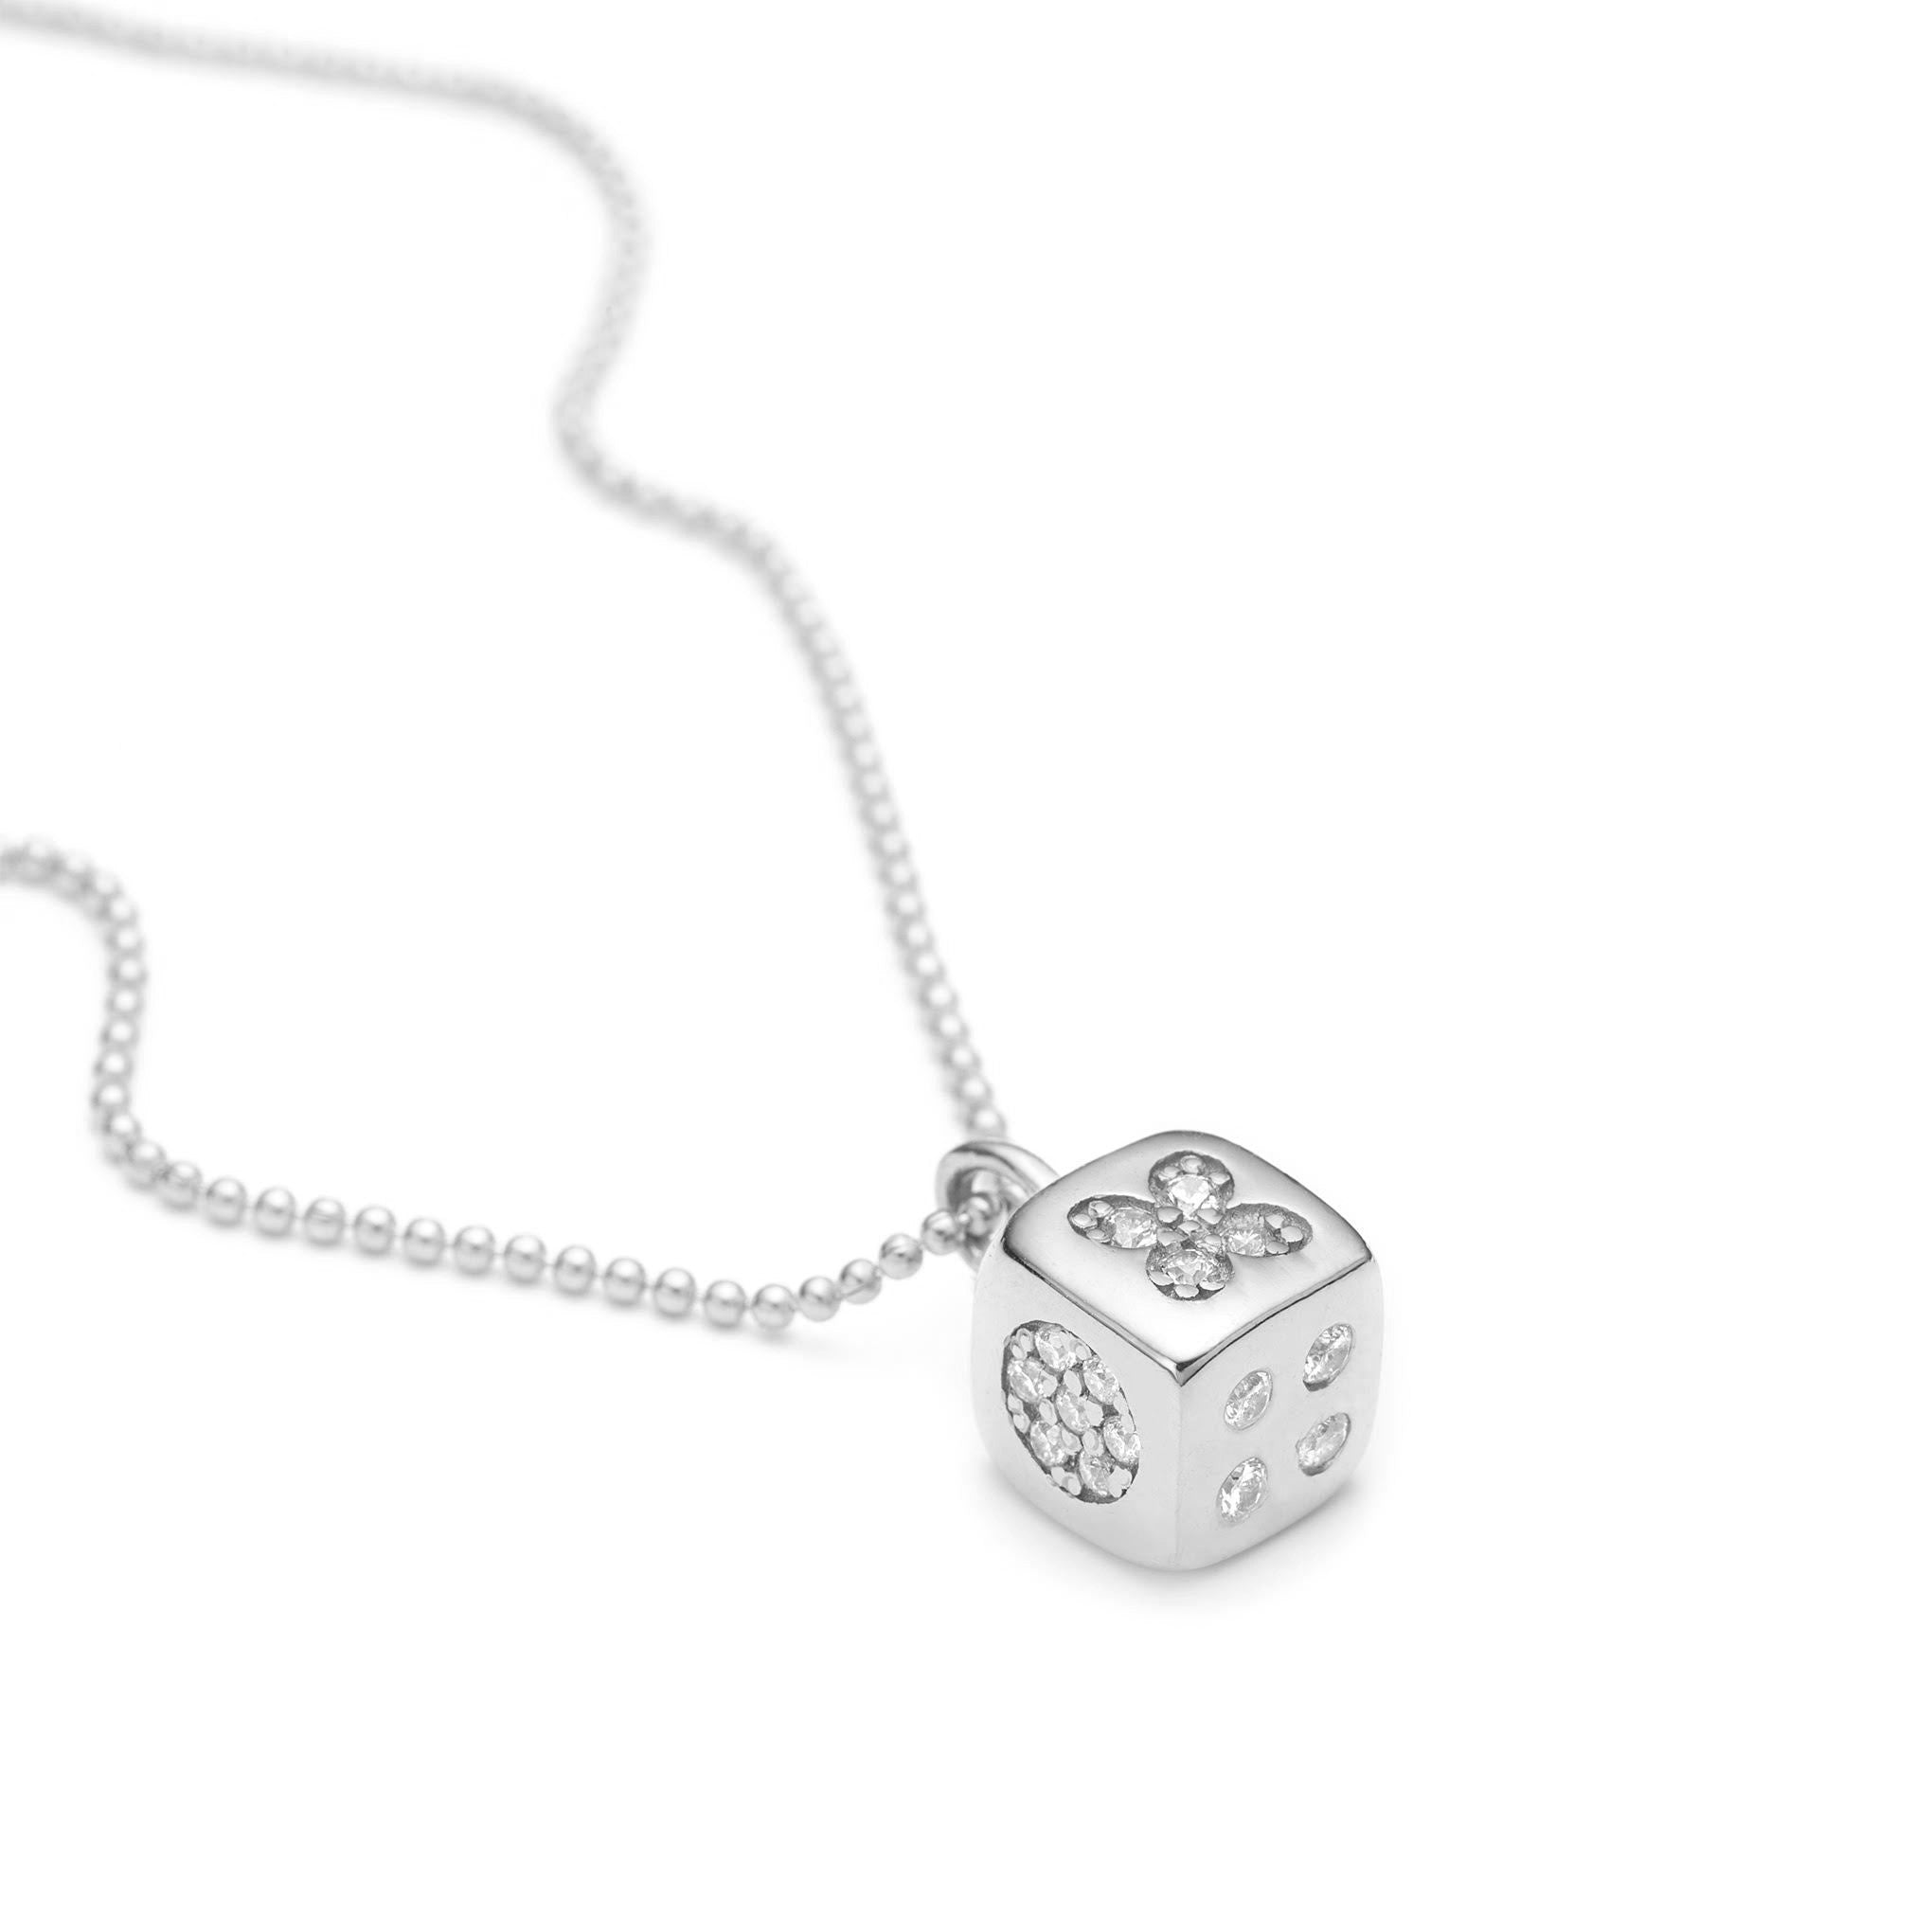 People Dice Necklace - With Love Darling